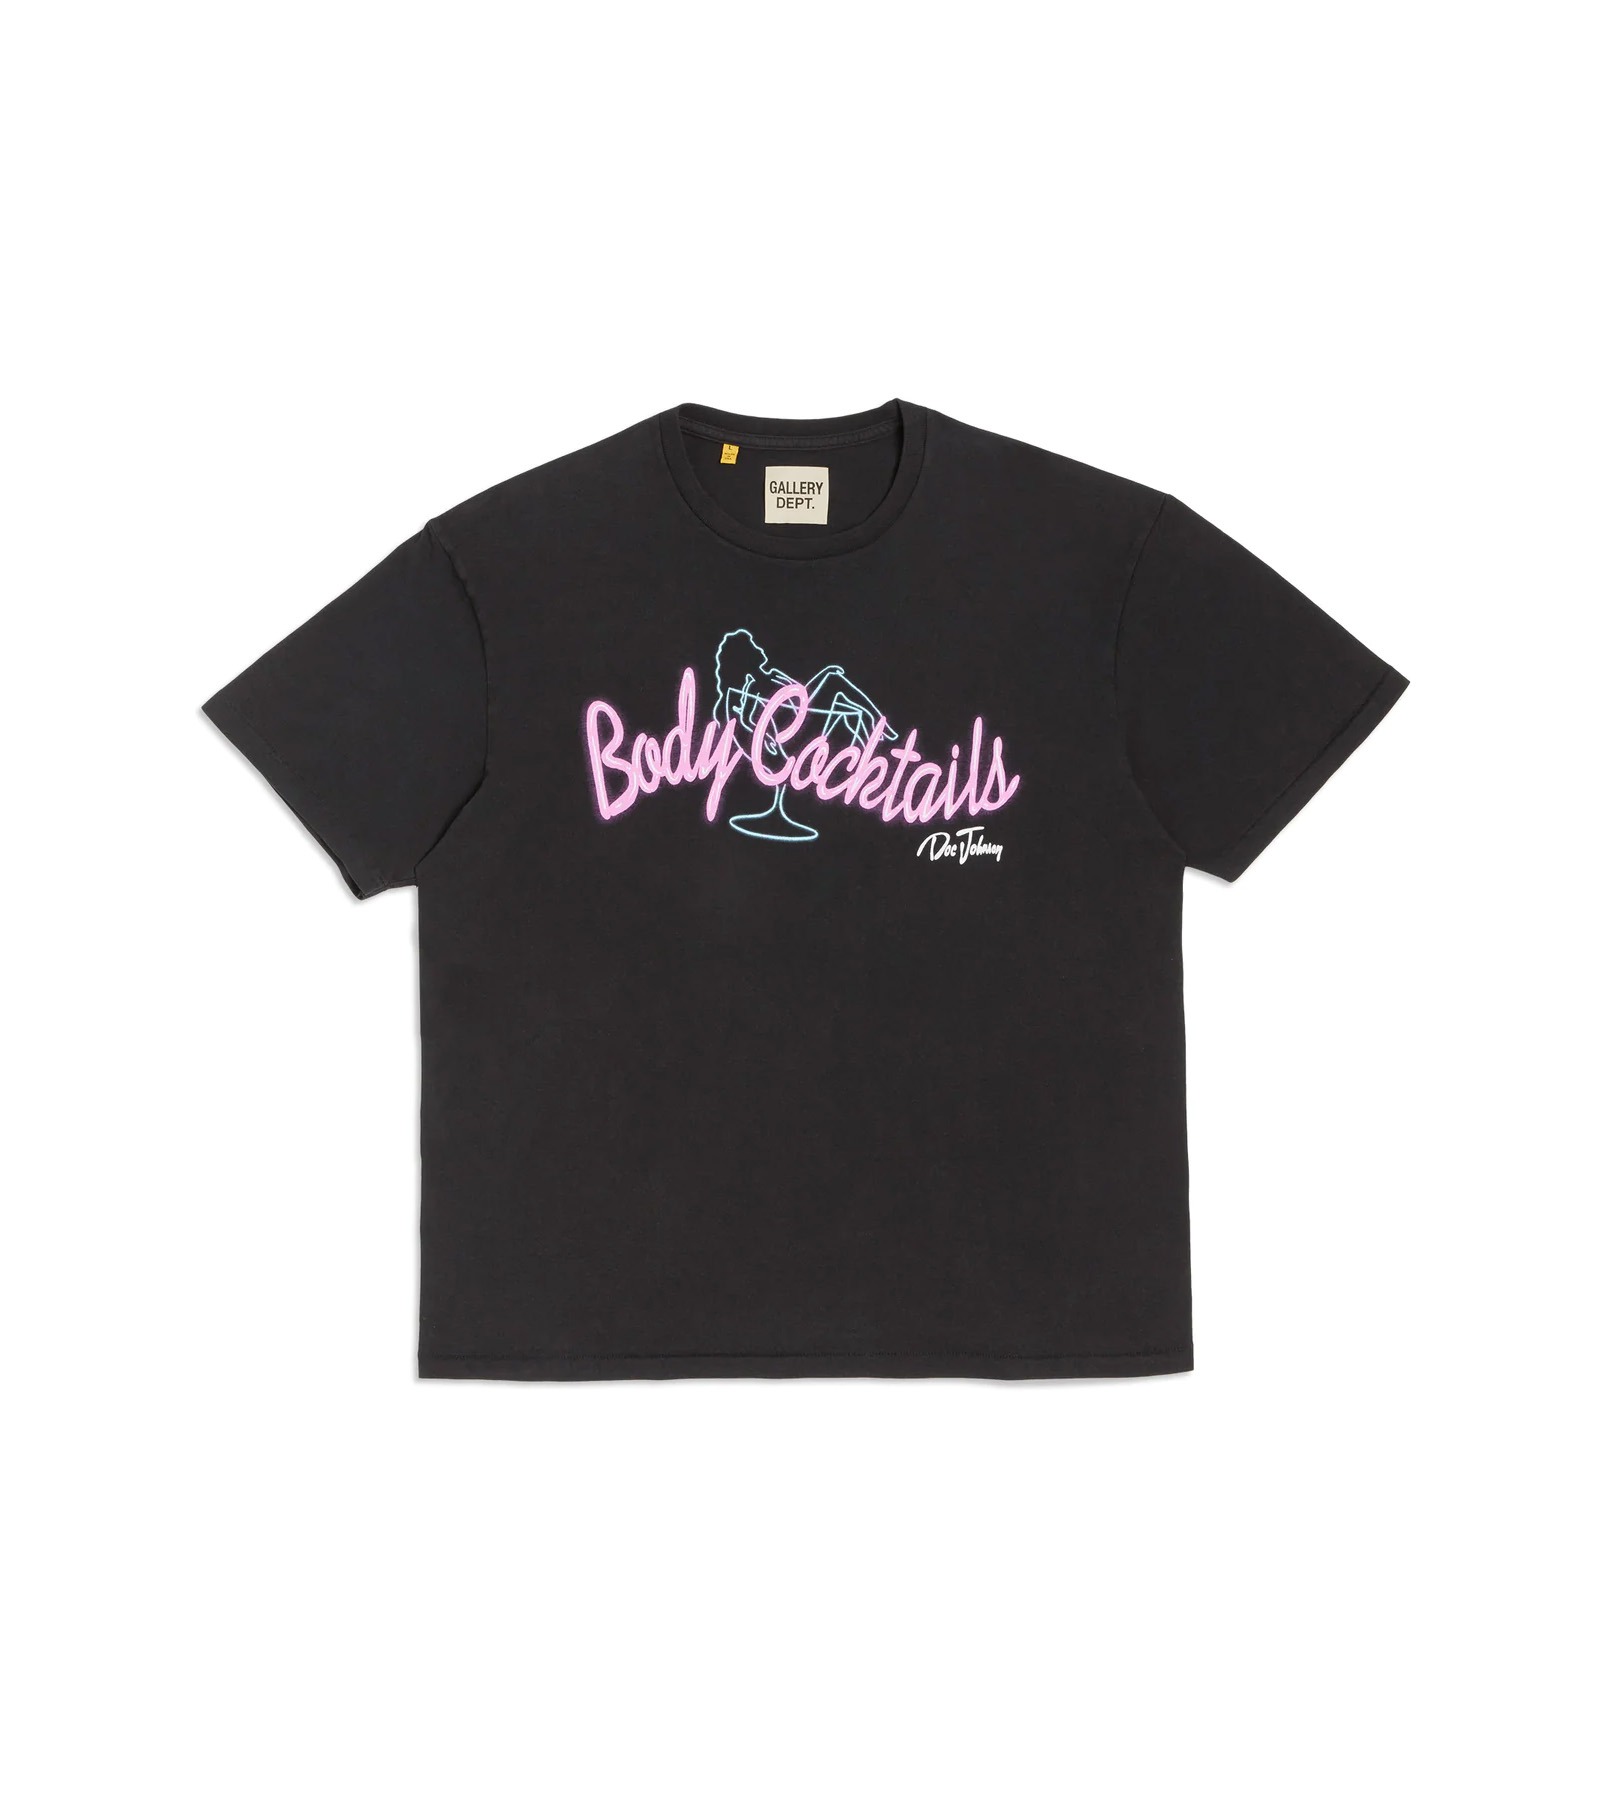 BODY COCKTAILS TEE